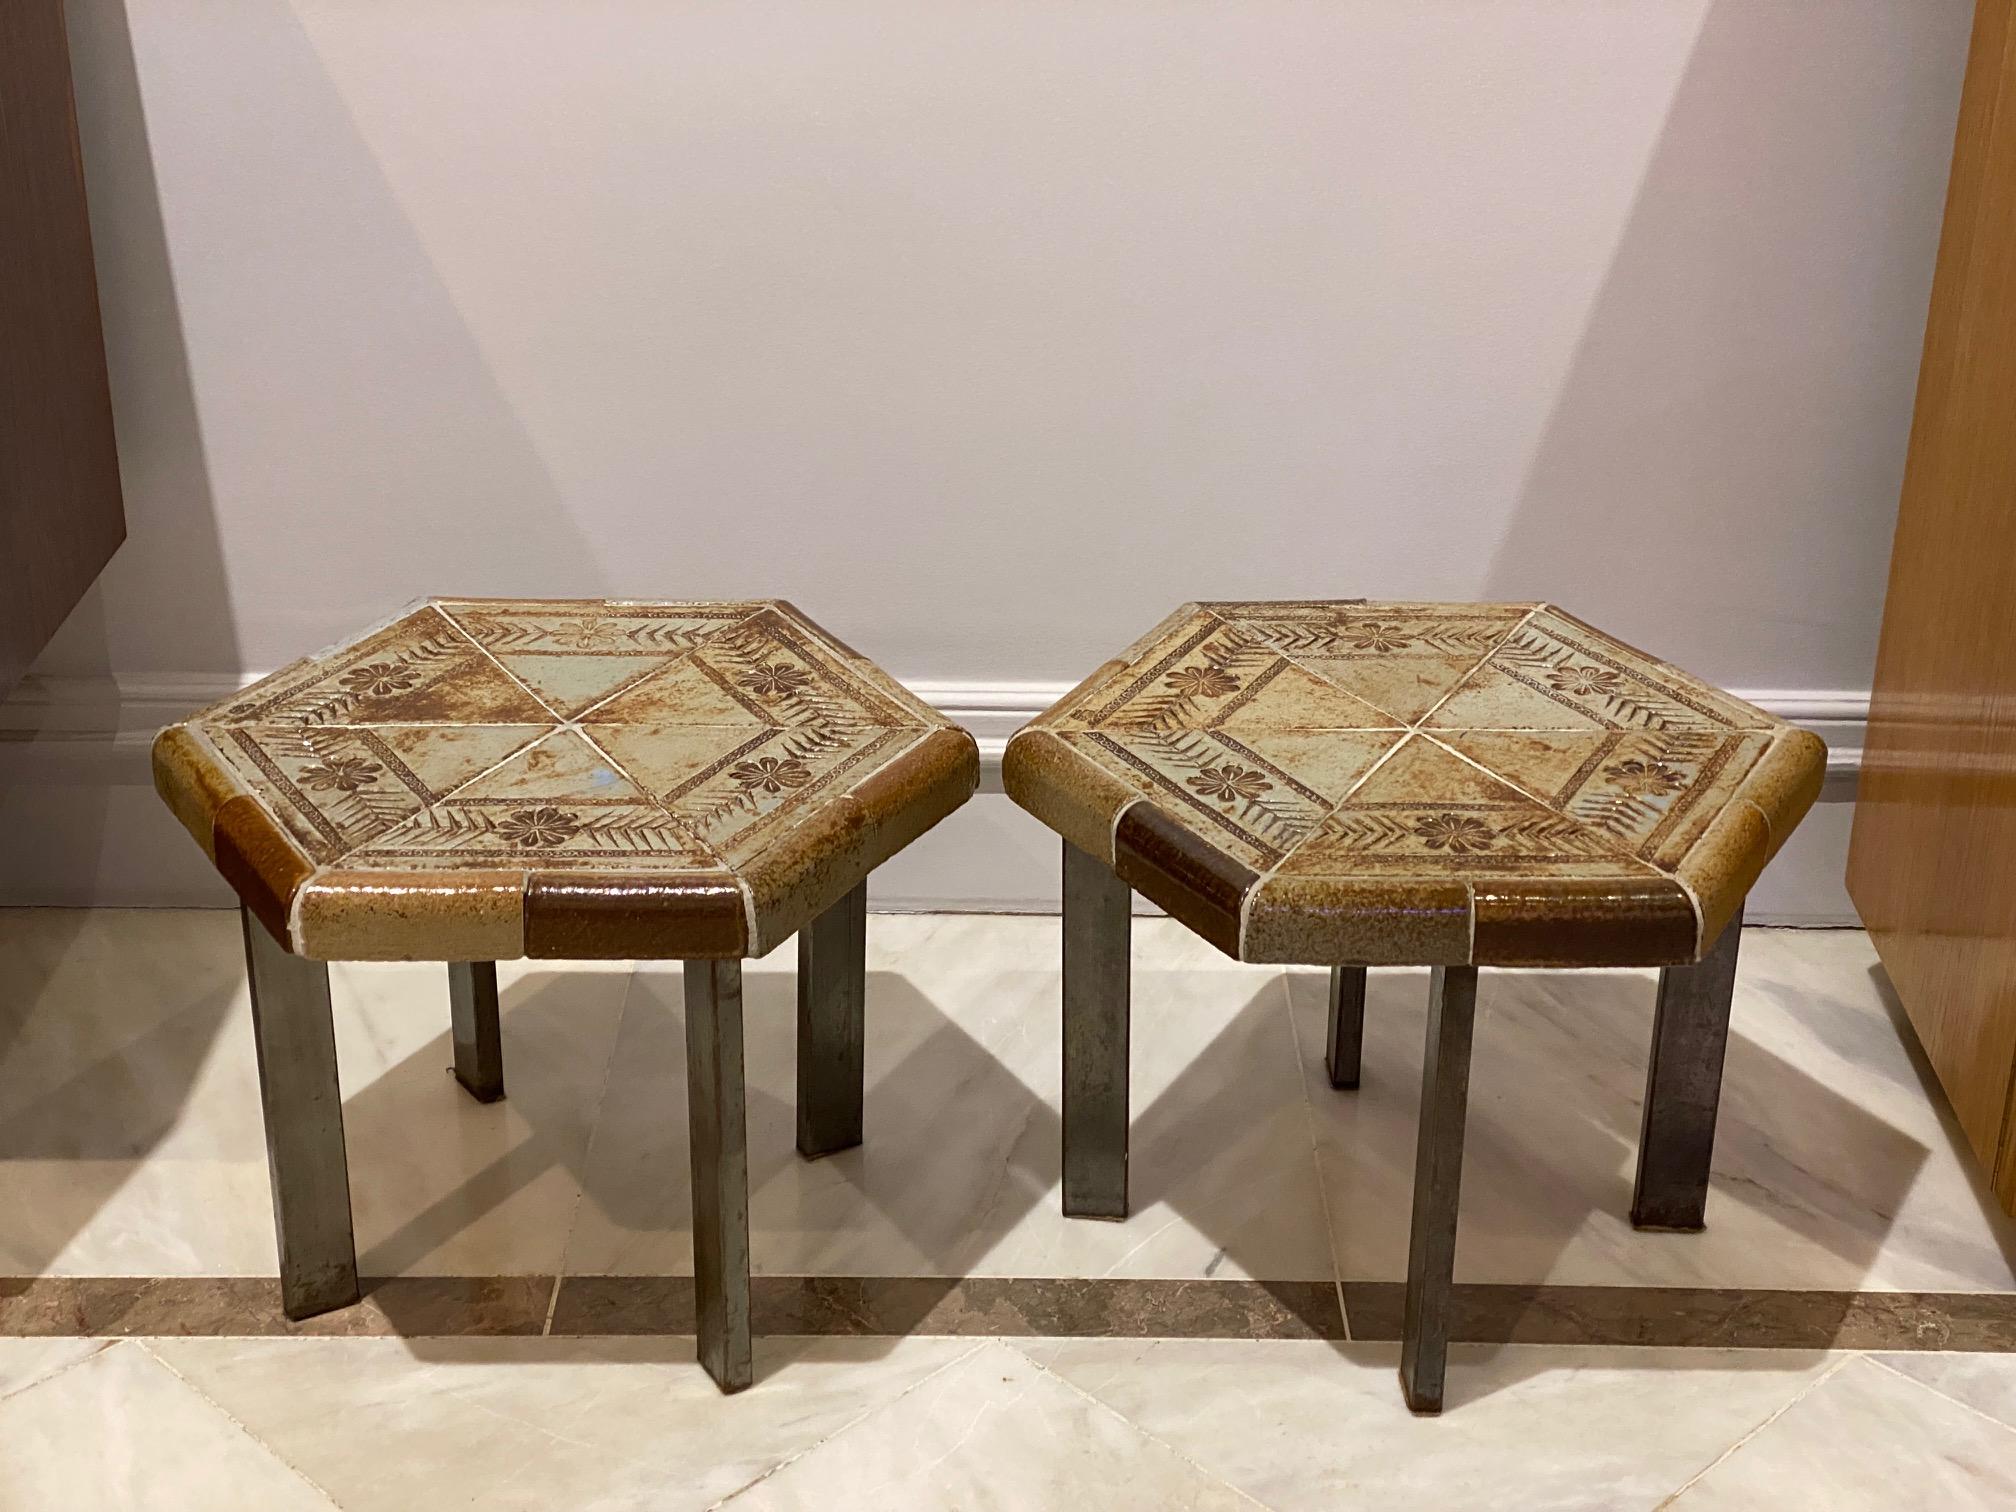 Roger Capron Pair of Small Ceramic Side Tables 1960s For Sale 3